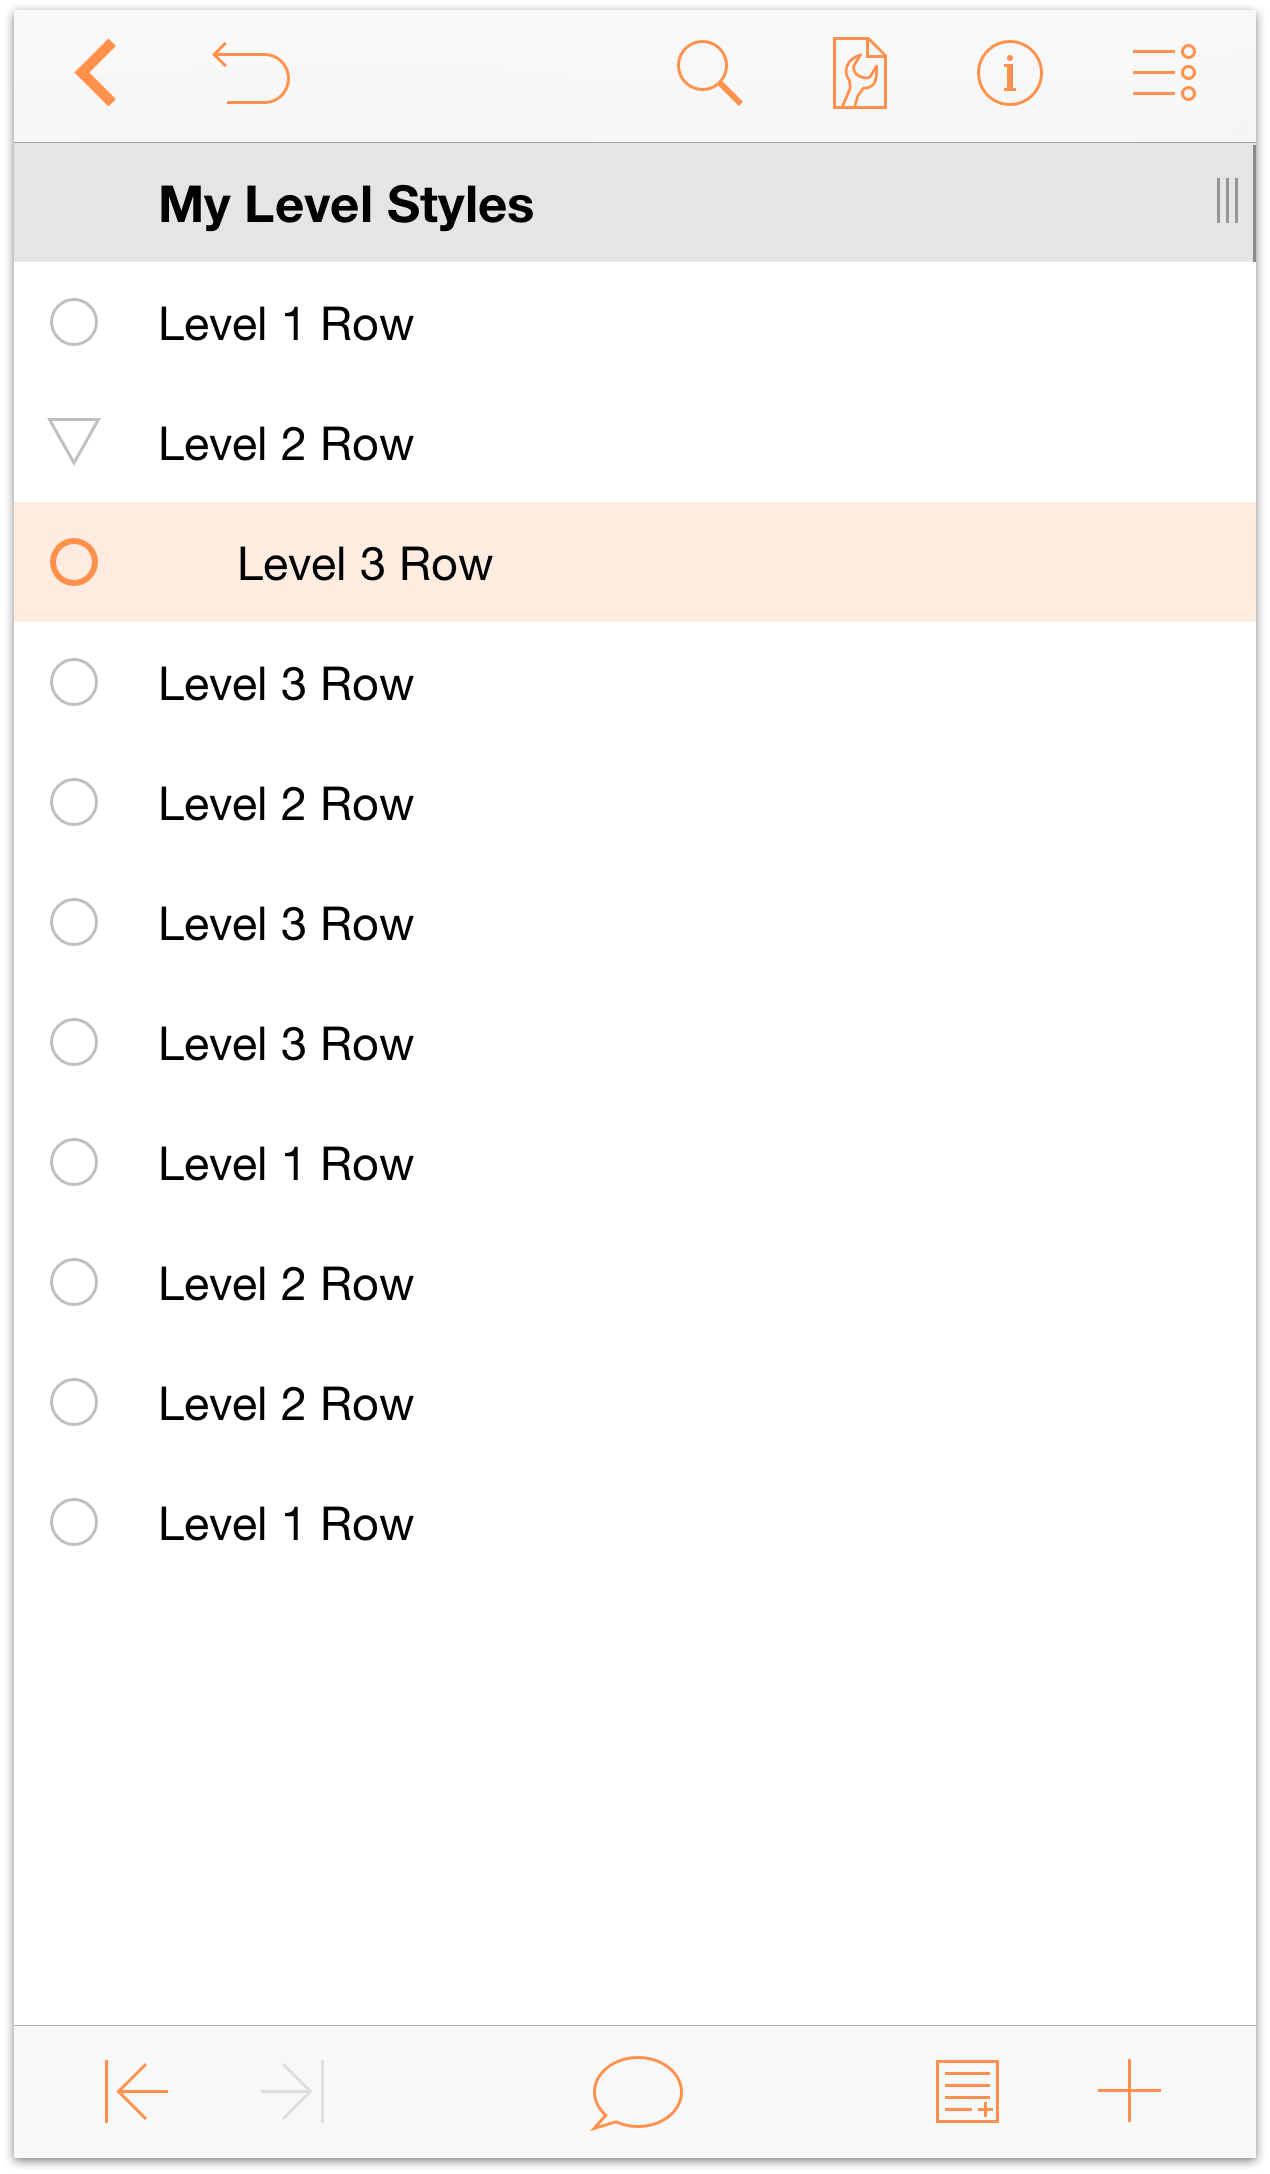 An indented Level 3 Row